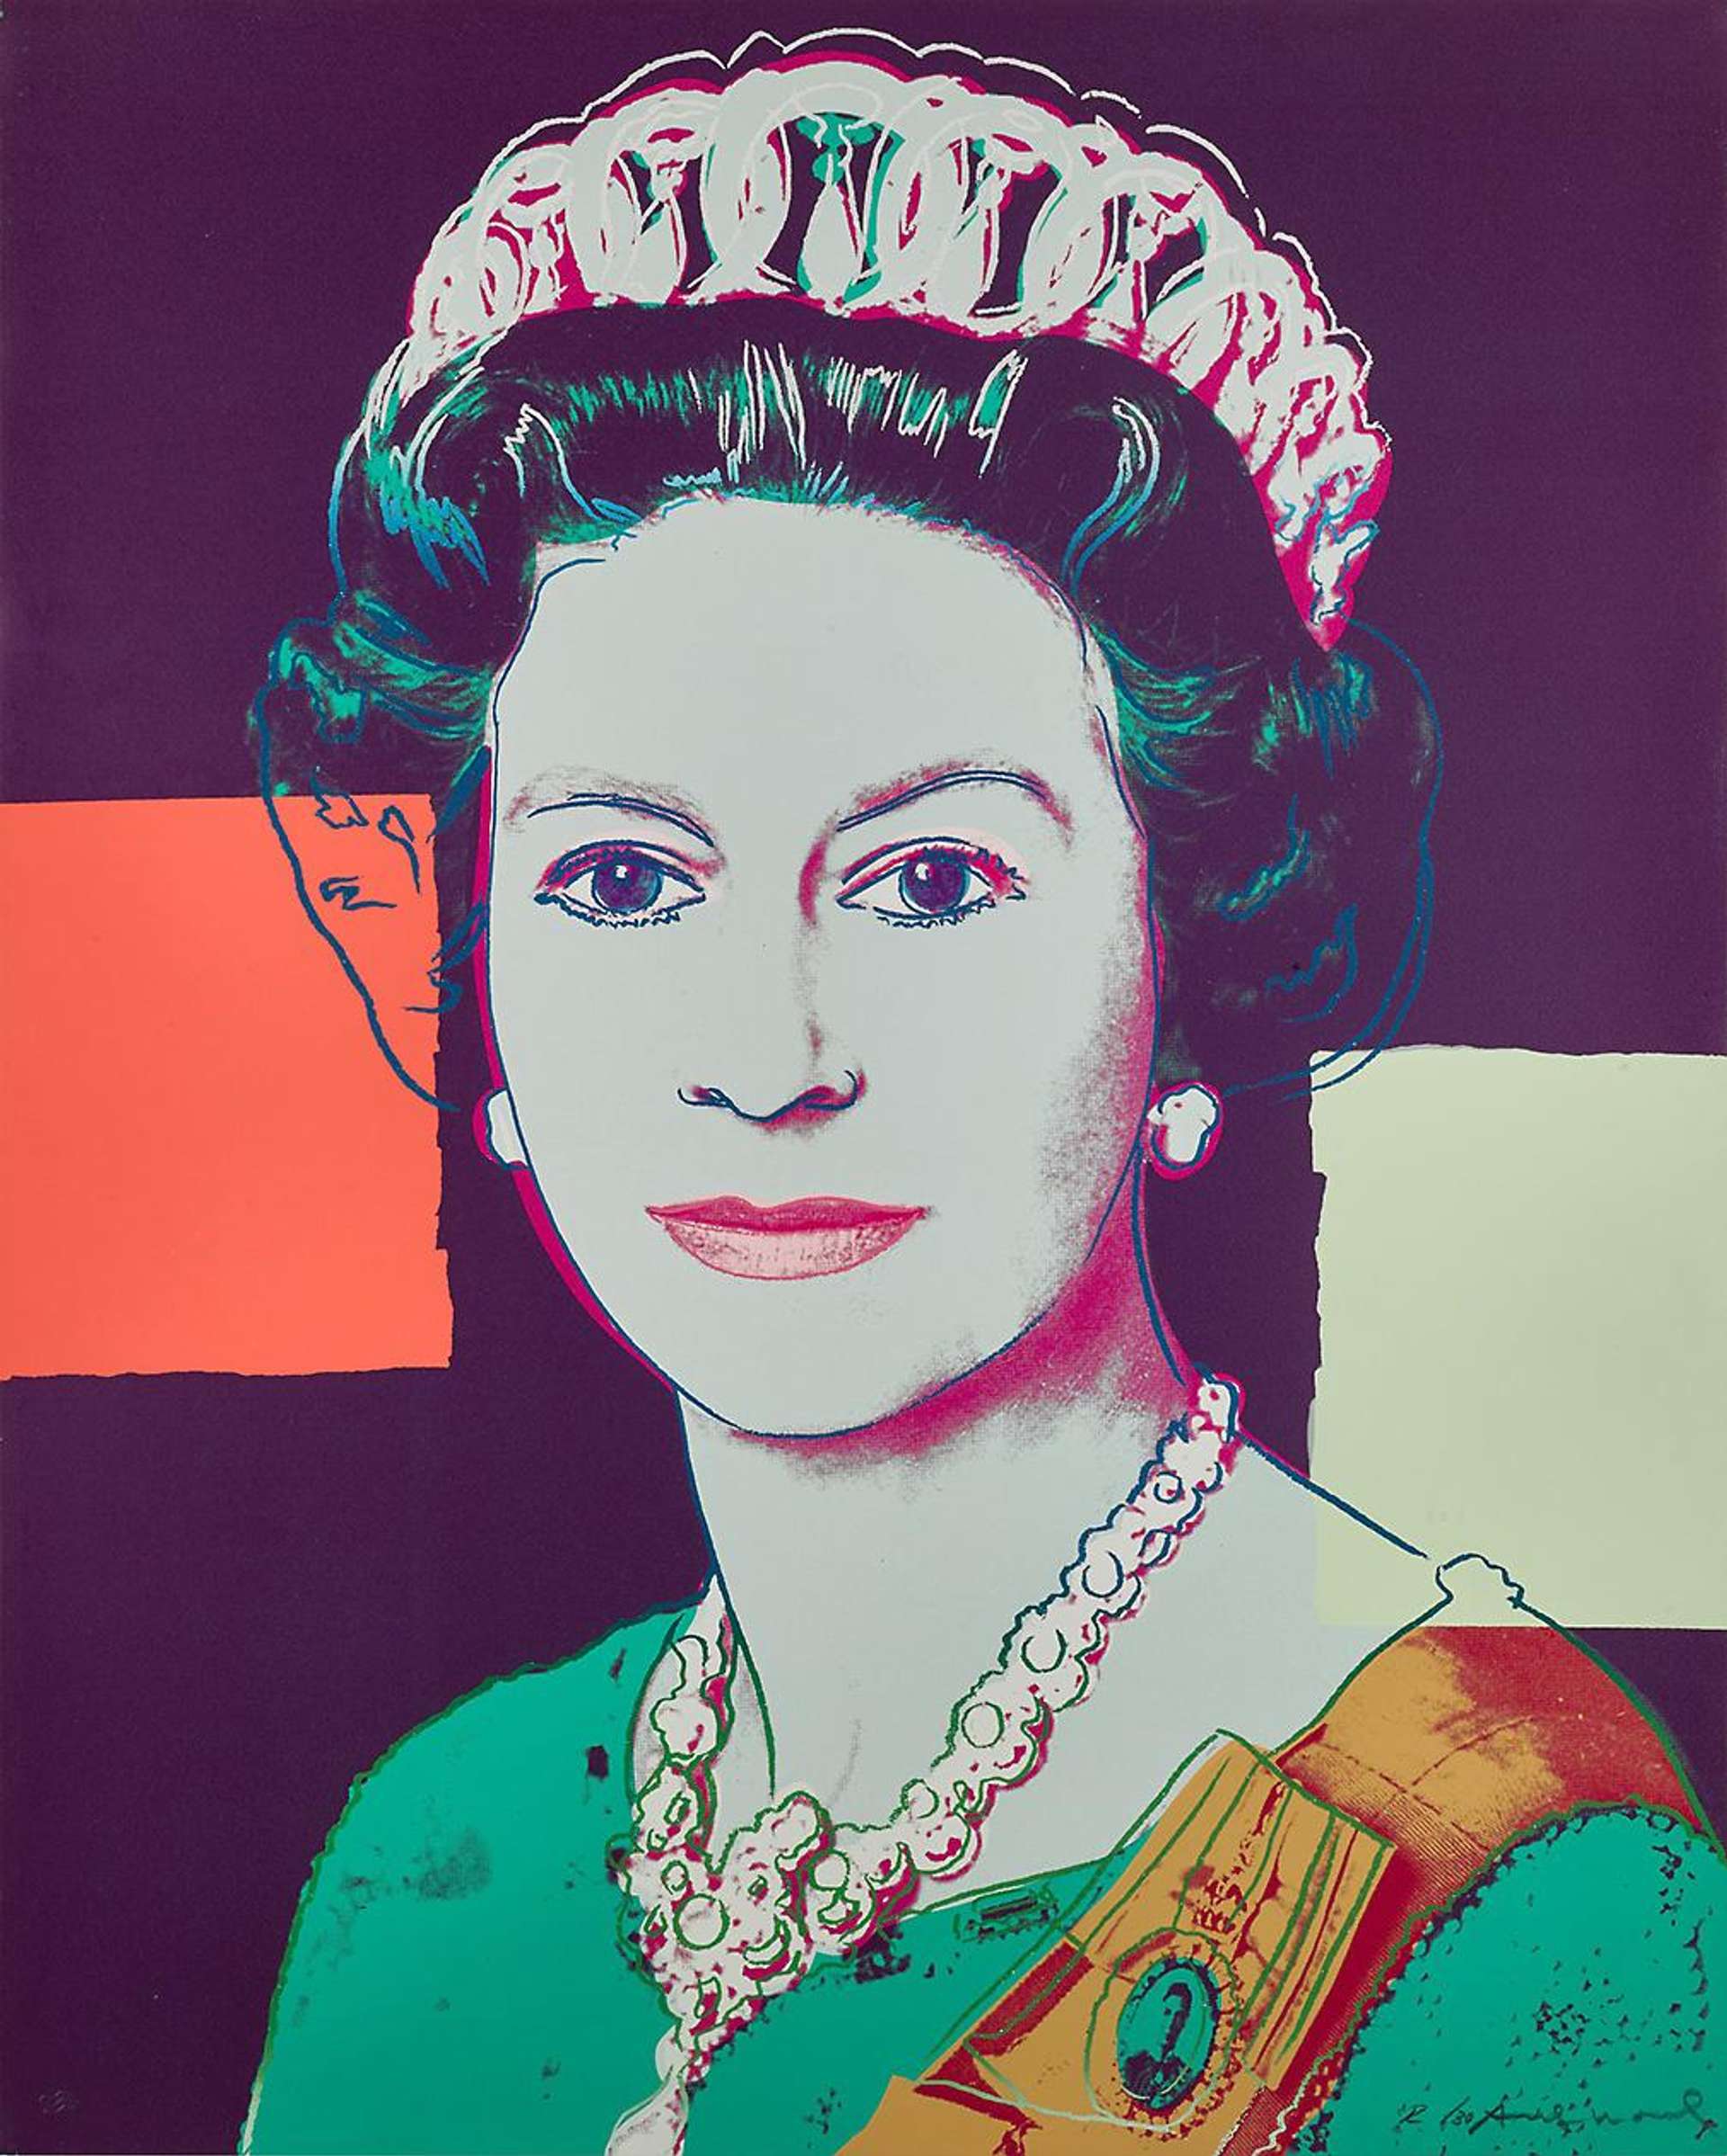 A screenprint by Andy Warhol depicting Queen Elizabeth II against a purple background with orange and cream collaged blocks.